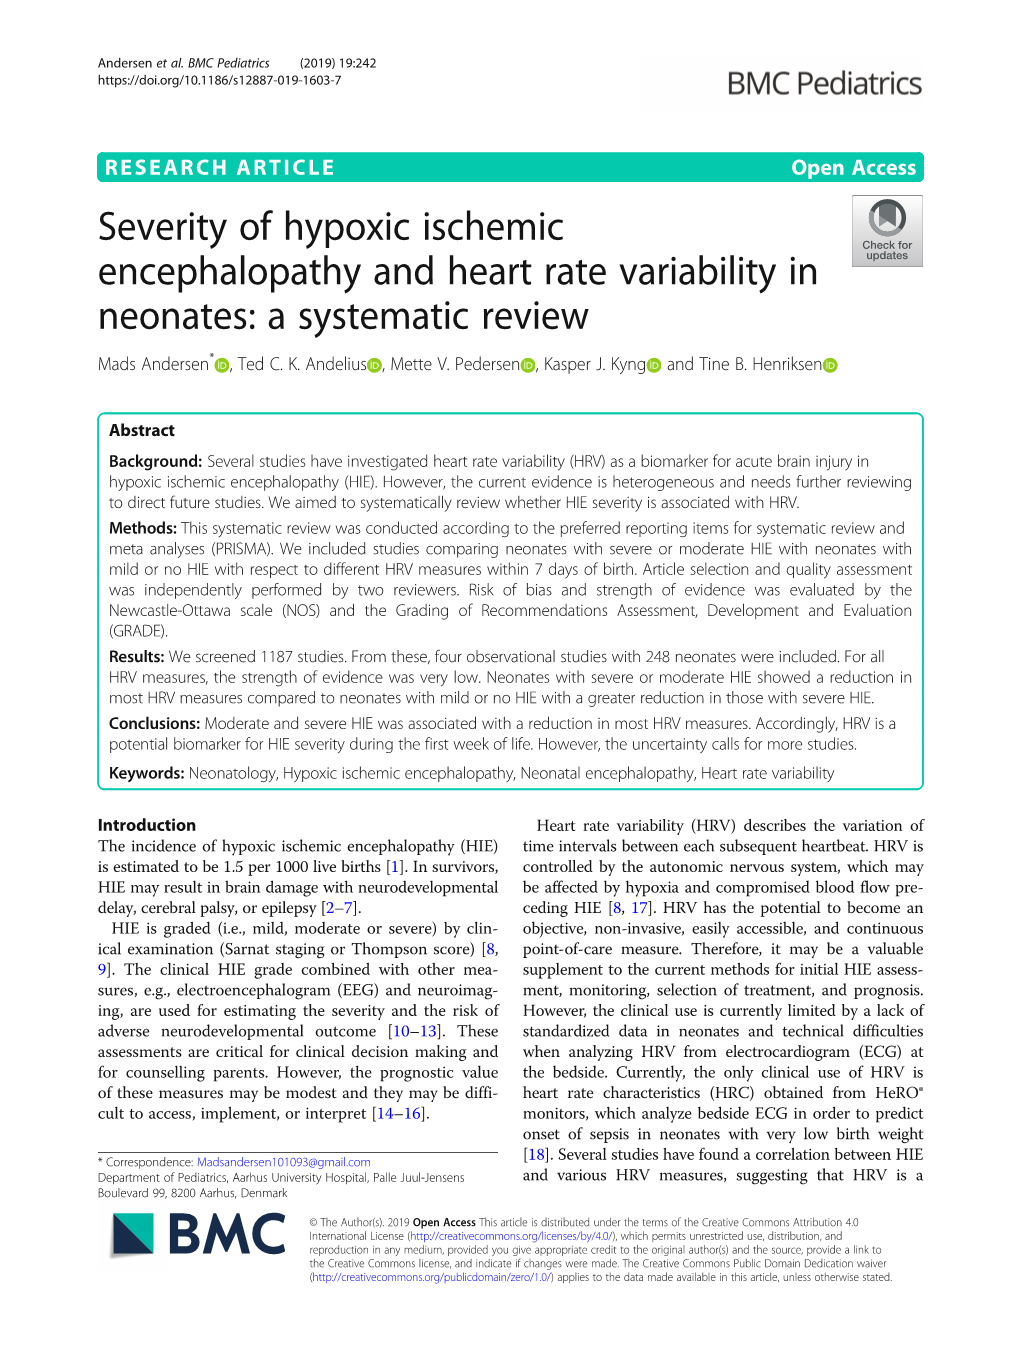 Severity of Hypoxic Ischemic Encephalopathy and Heart Rate Variability in Neonates: a Systematic Review Mads Andersen* , Ted C